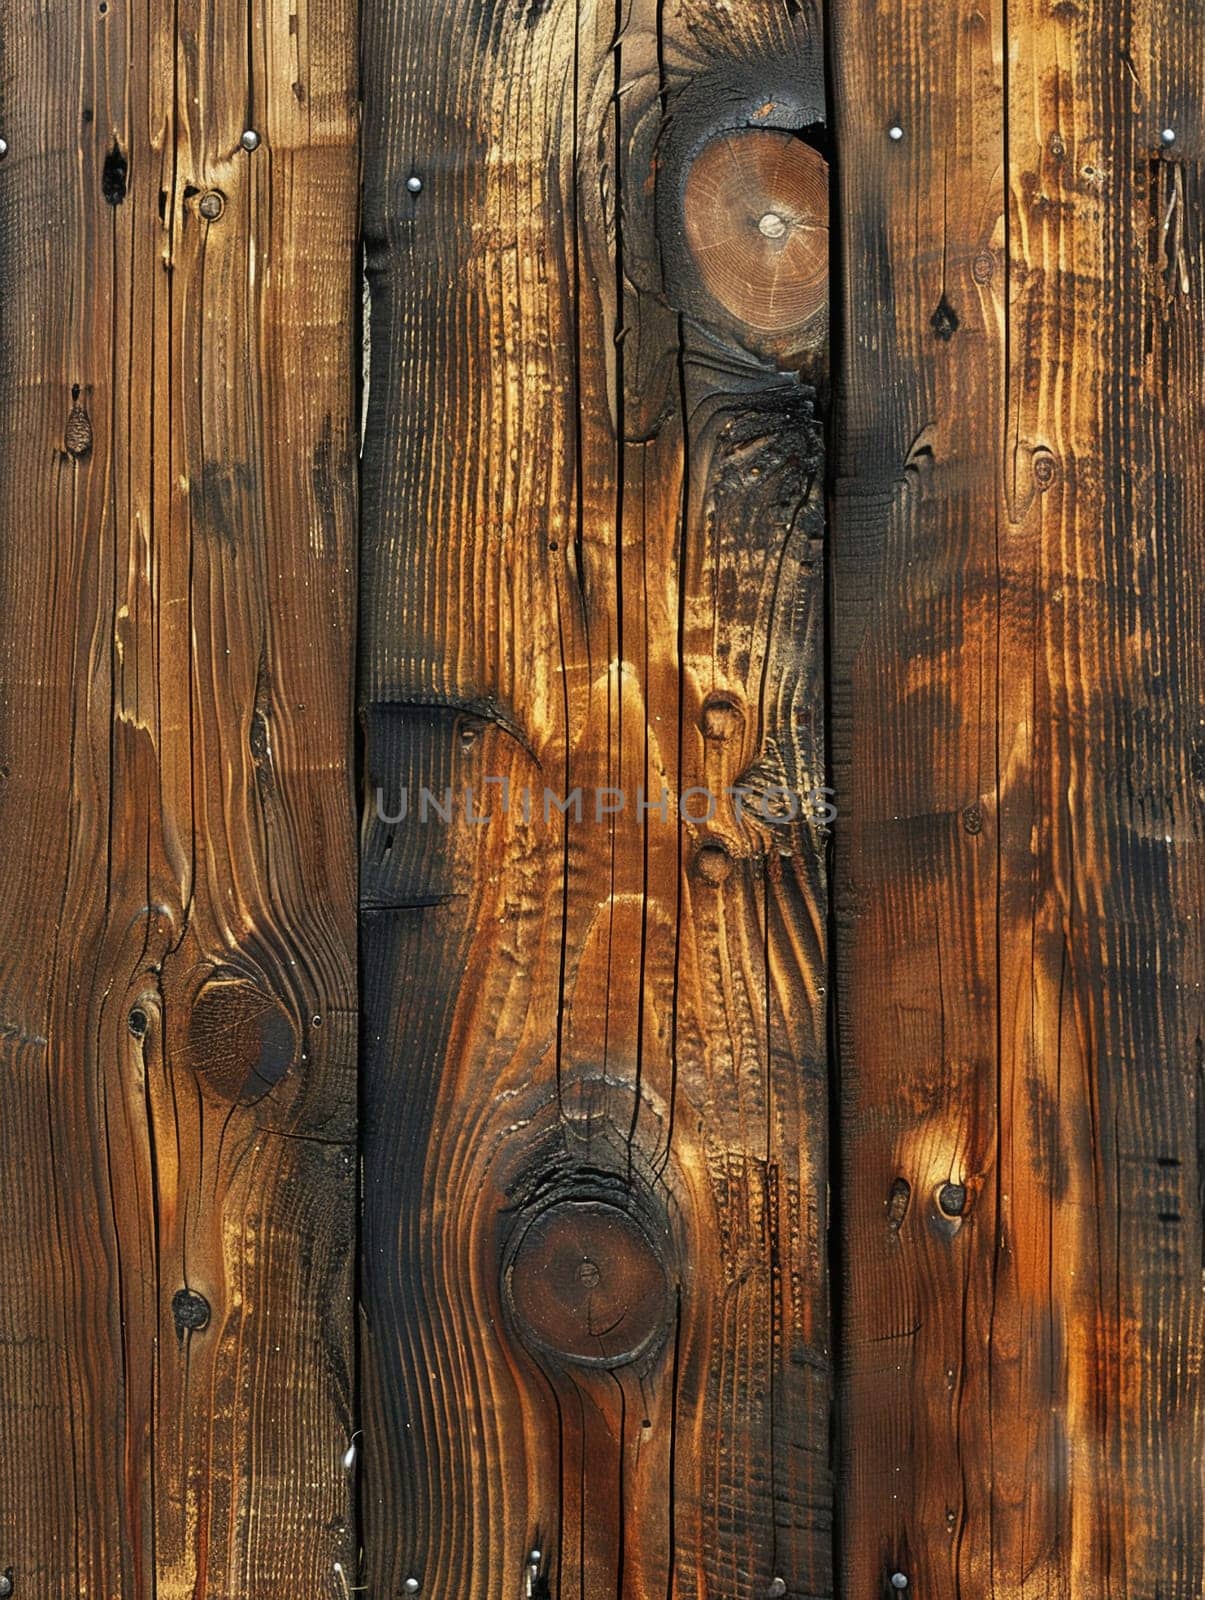 Rustic wood grain texture close-up, ideal for vintage and country-themed designs.